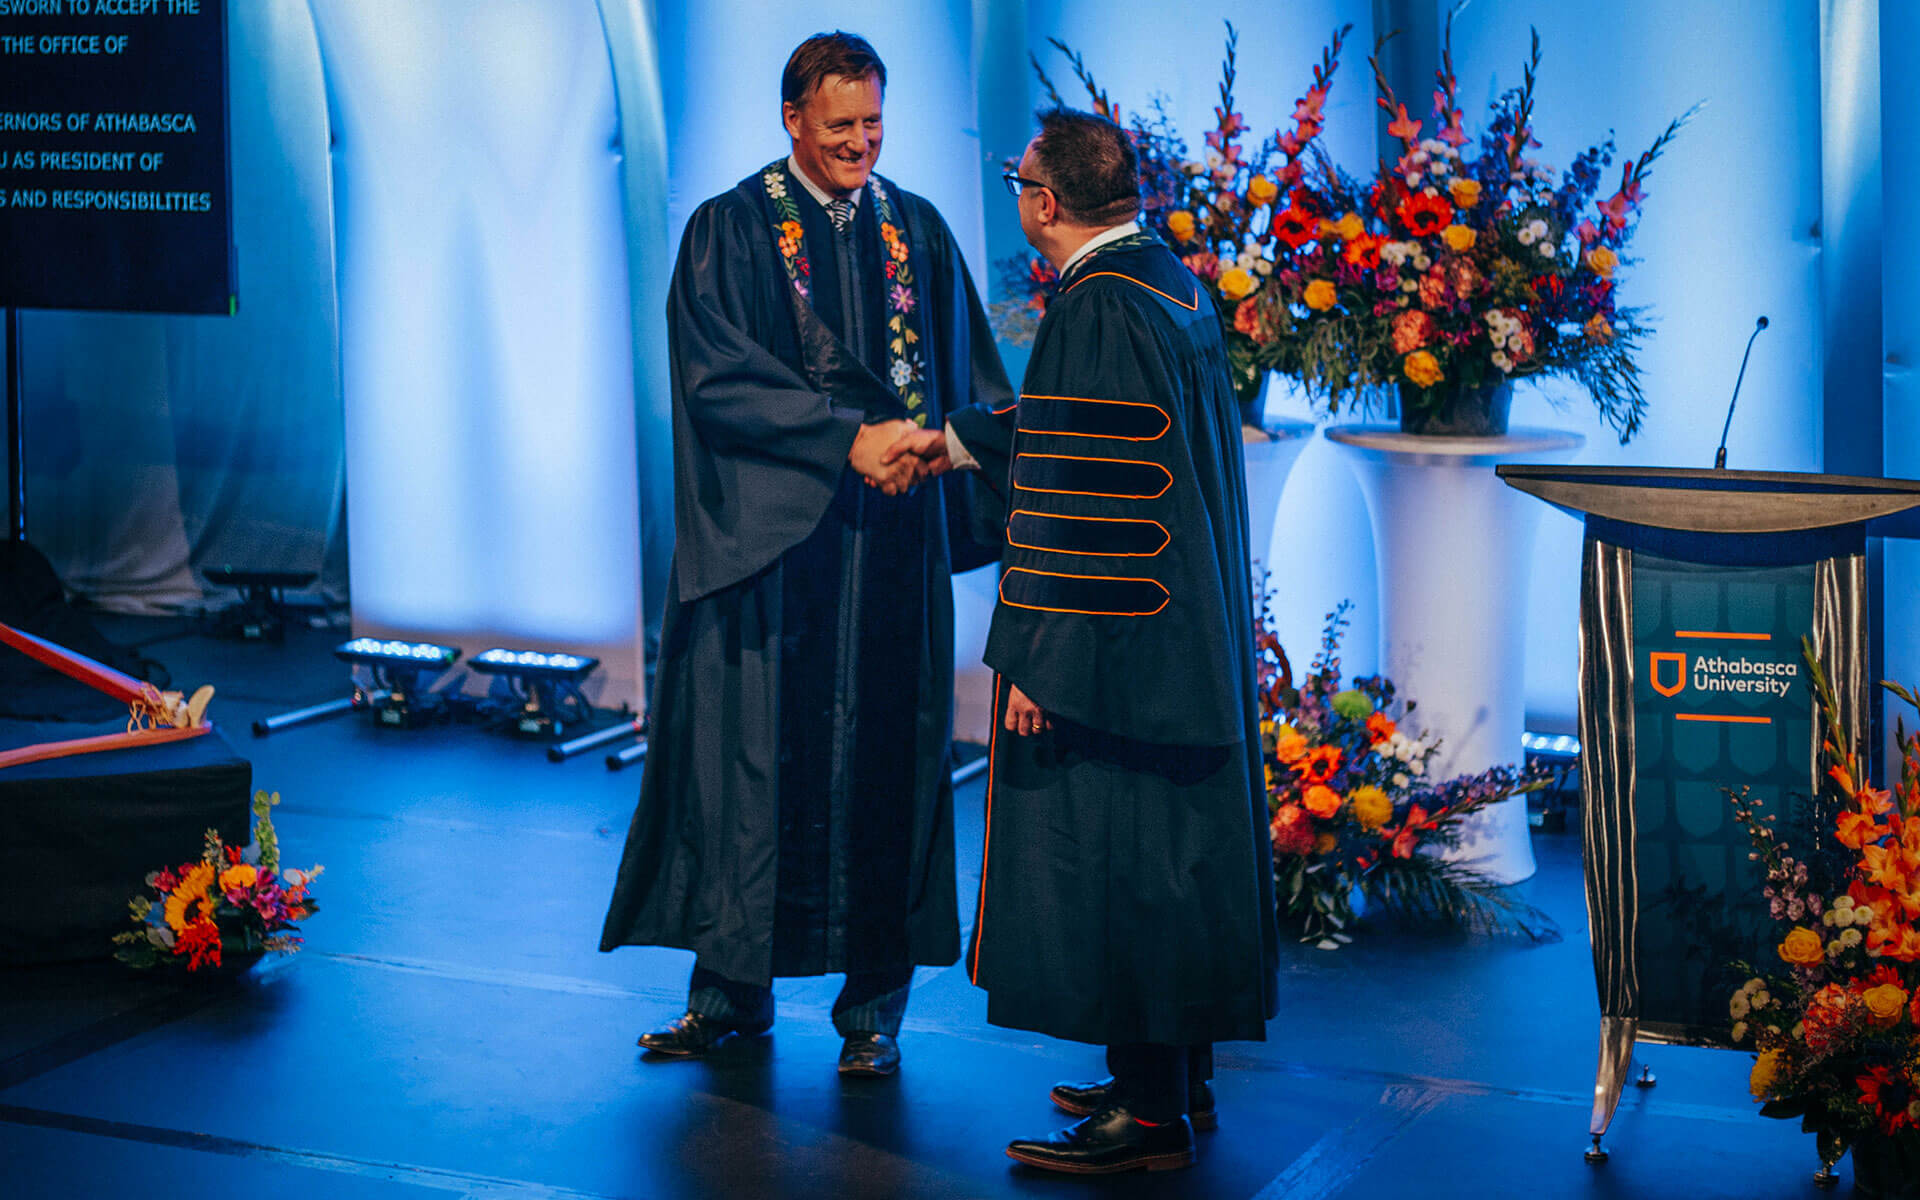 AU board chair shakes hands with Dr. Alex Clark